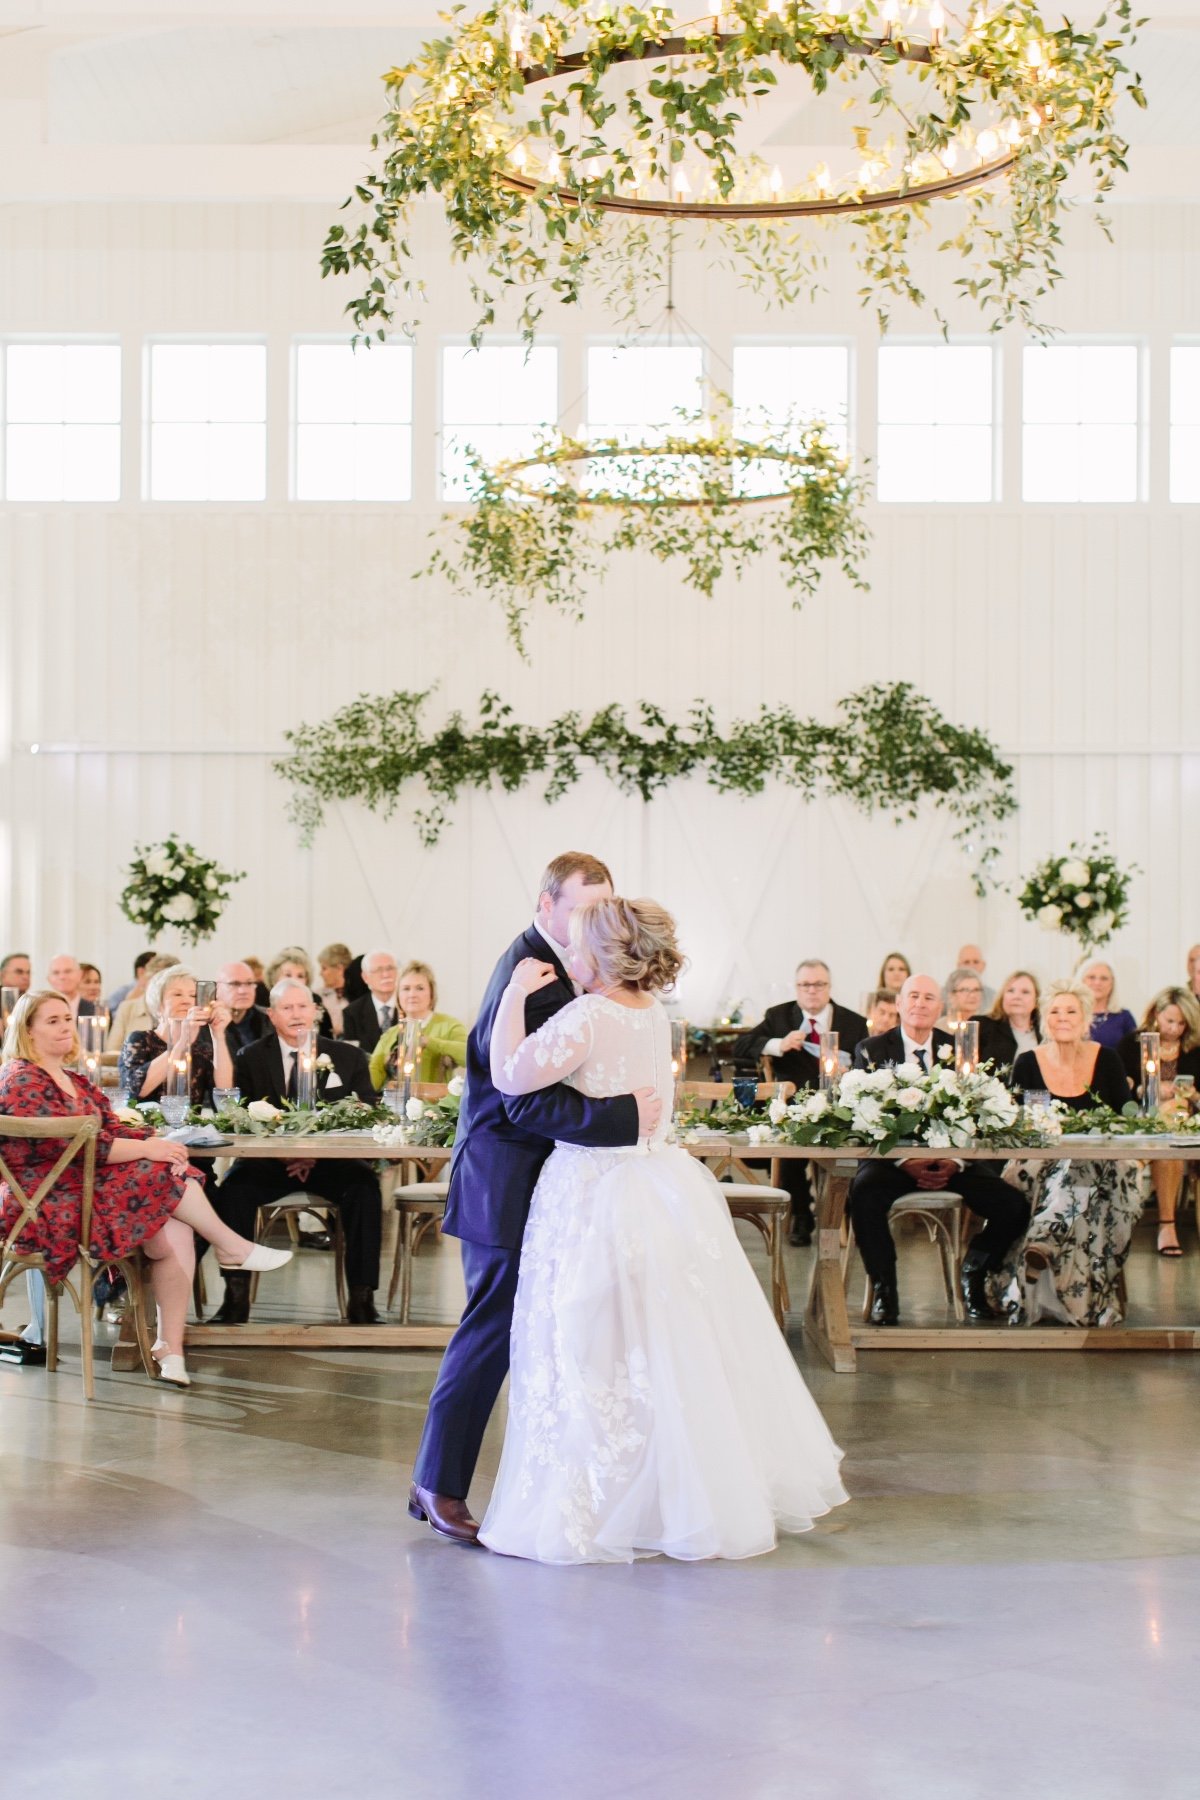 photo of the bride and groom taking their first dance as married couple